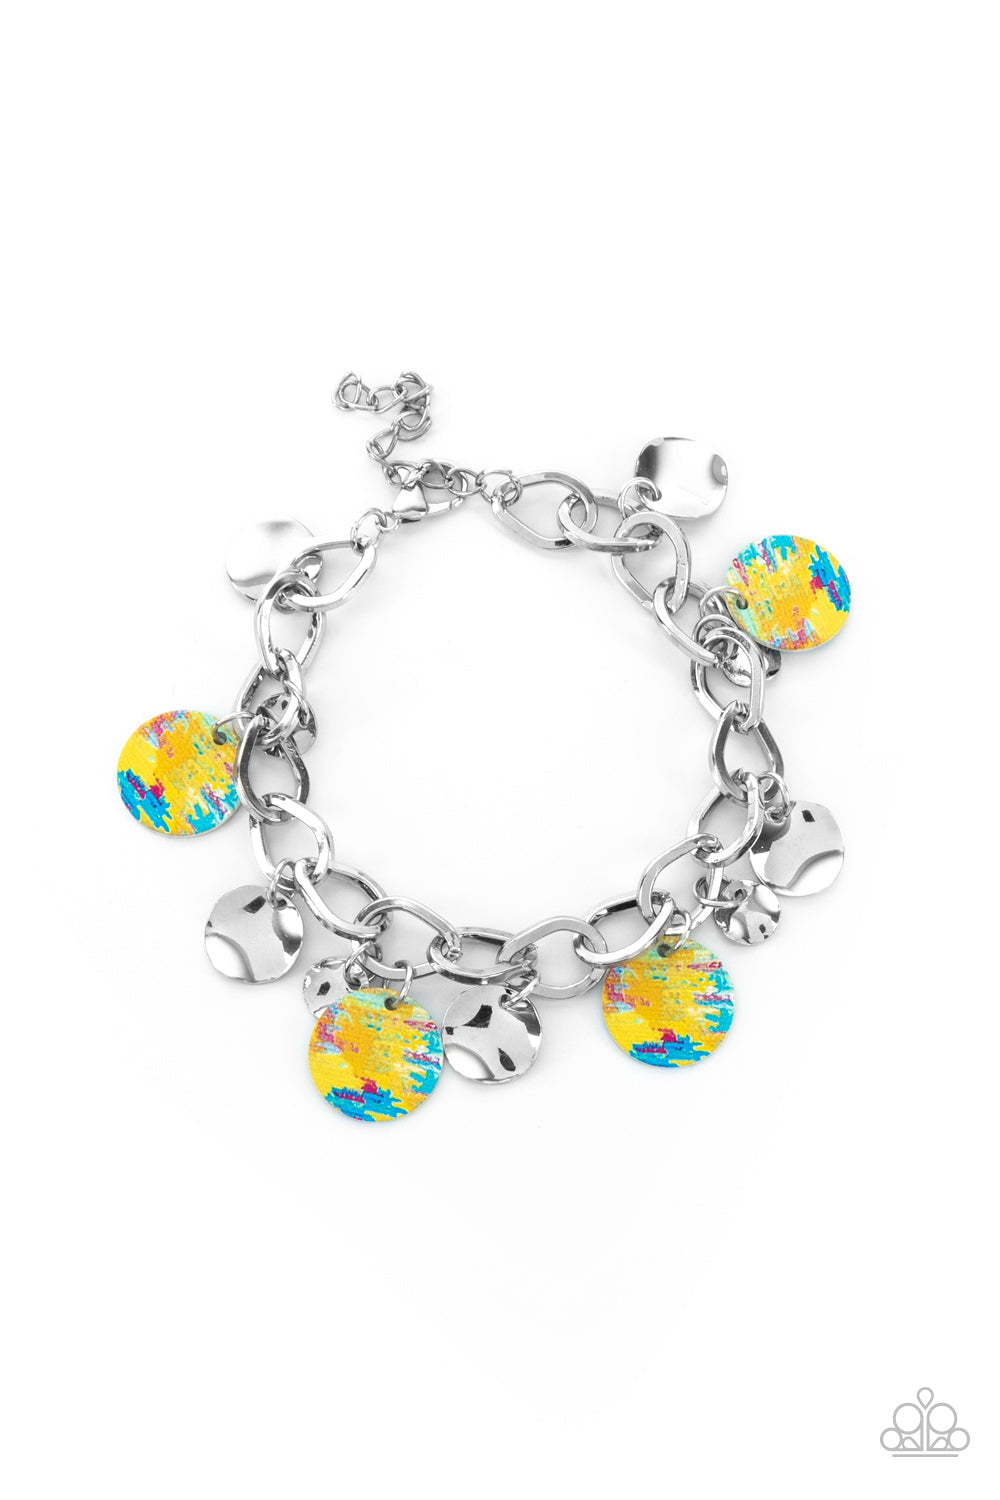 Teasingly Tie Dye - Yellow - Blue - Silver Bracelet - Paparazzi Accessories -colorful tie dye print, a collection of colorful and dainty silver discs swings from a bulky silver chain around the wrist for a trendy finish. Features an adjustable clasp closure. 